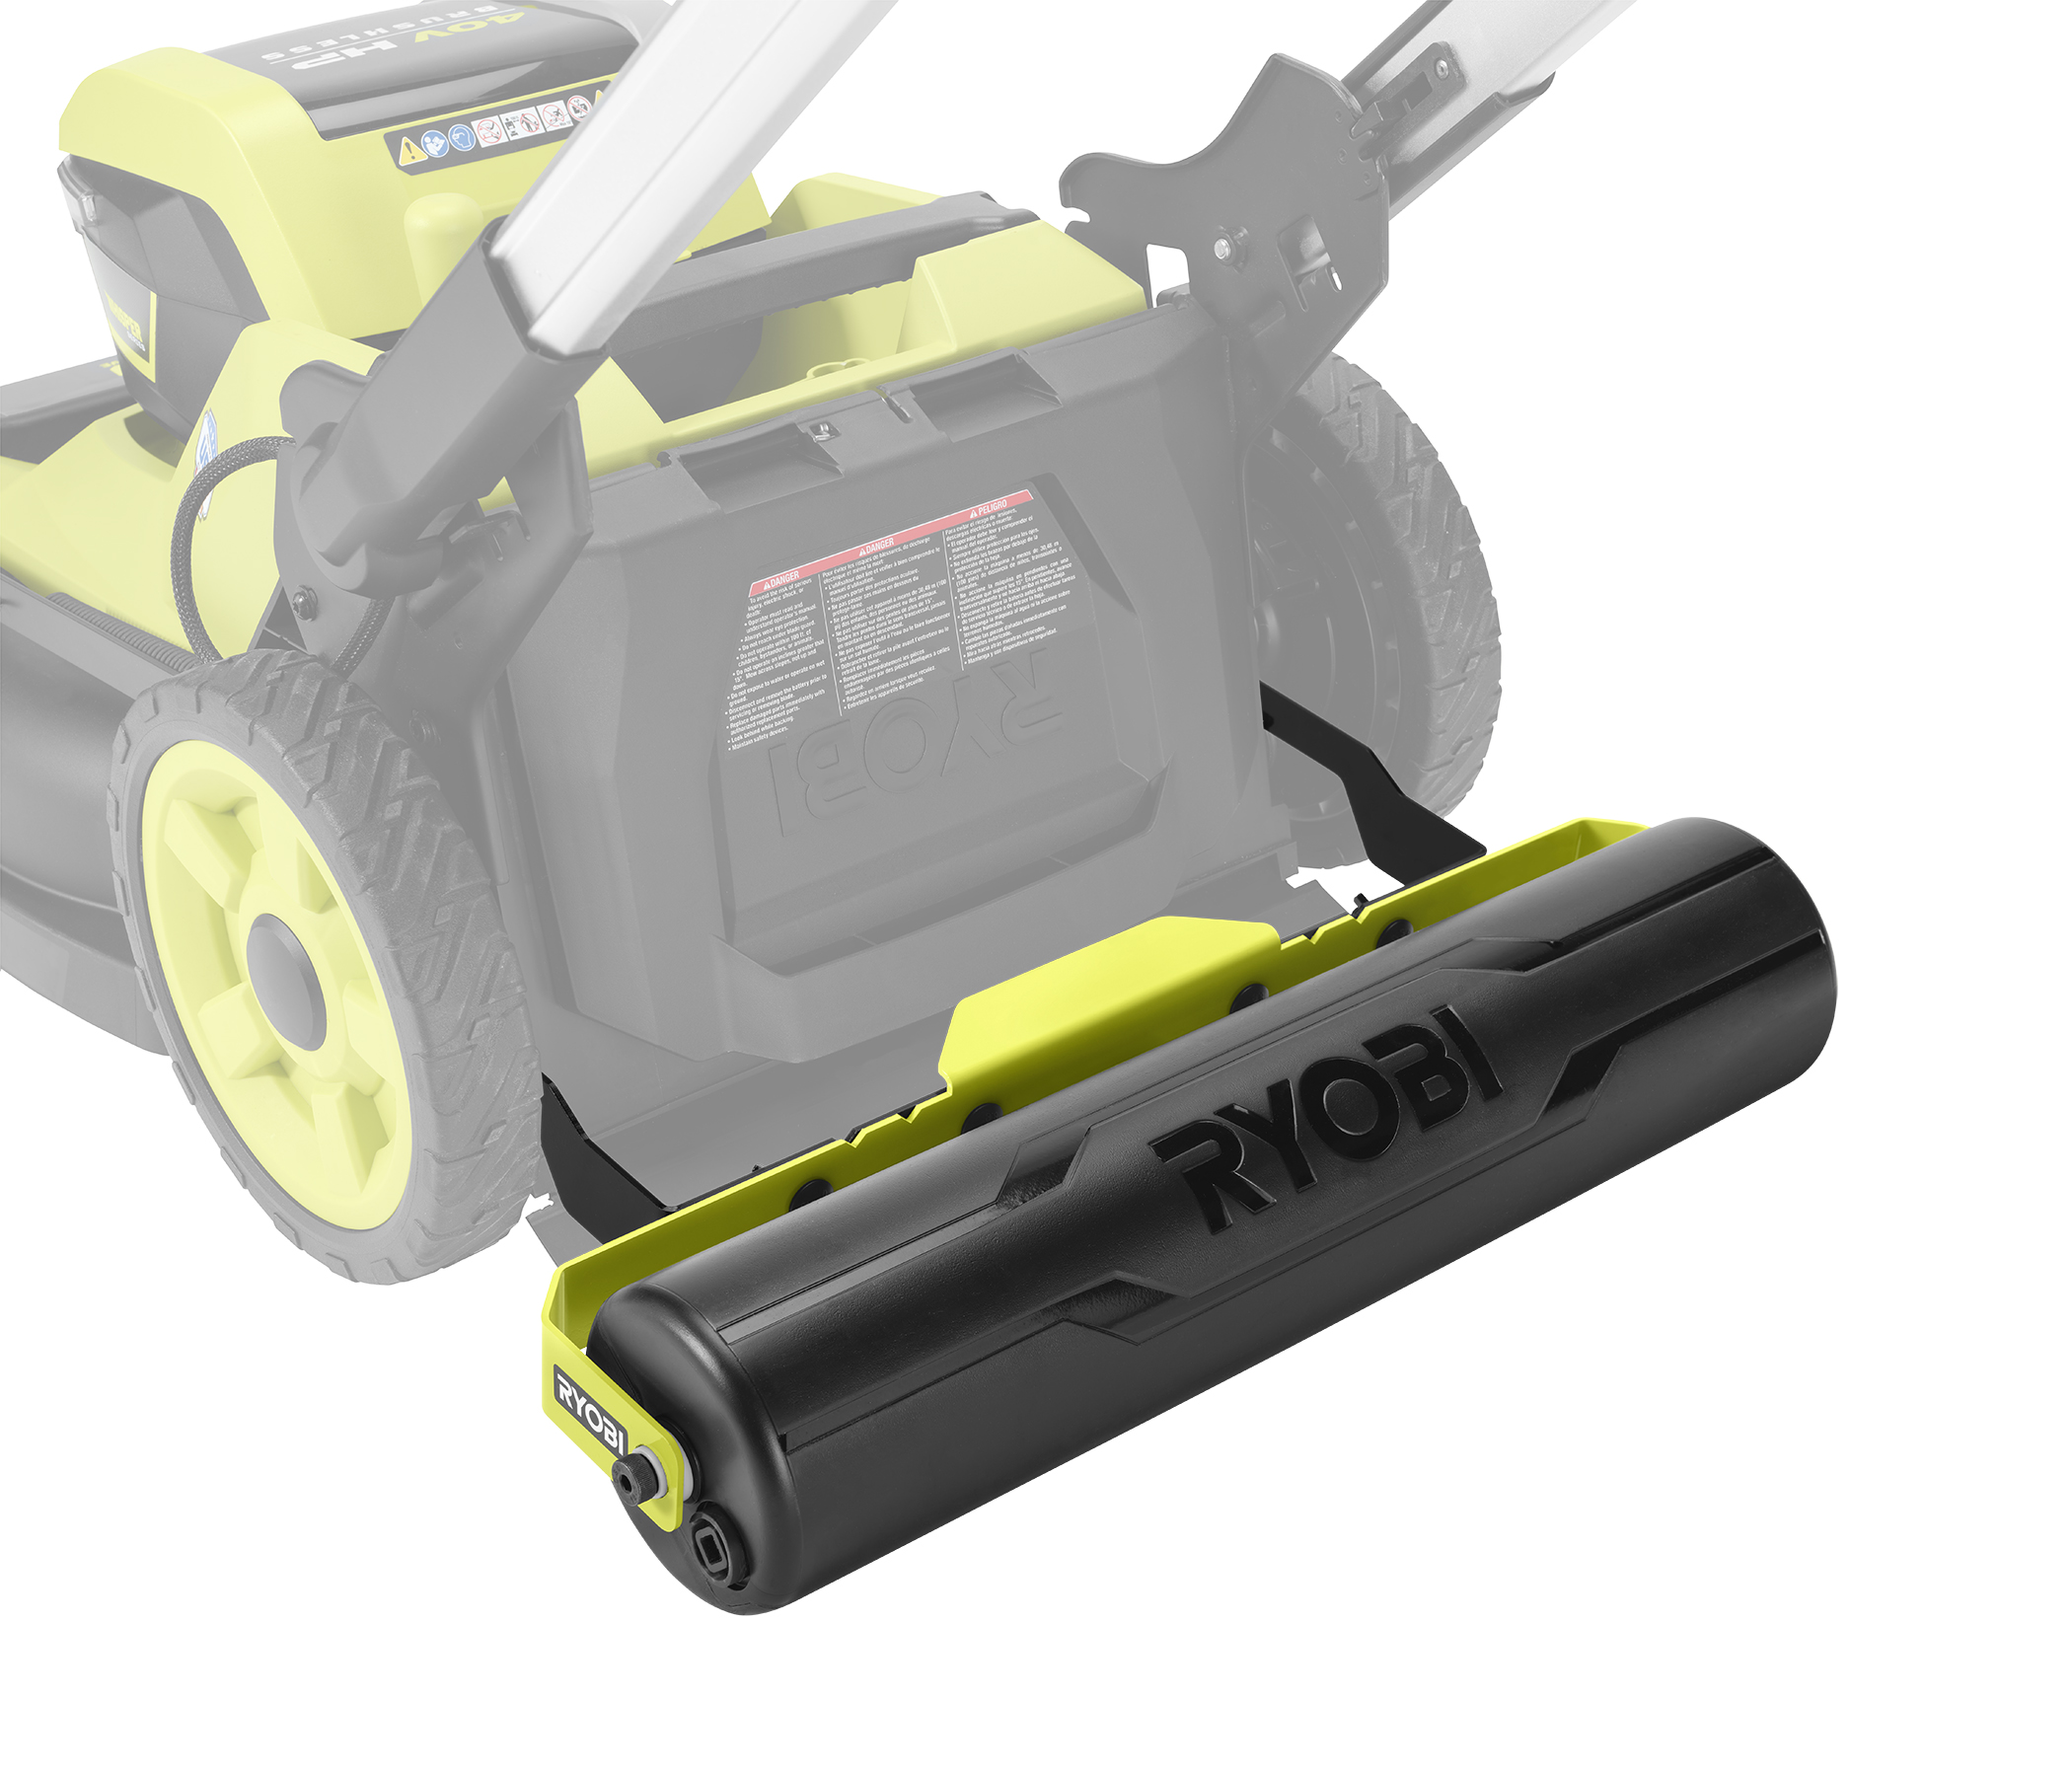 Compatible with RYOBI 20" & 21" Lawn Mowers